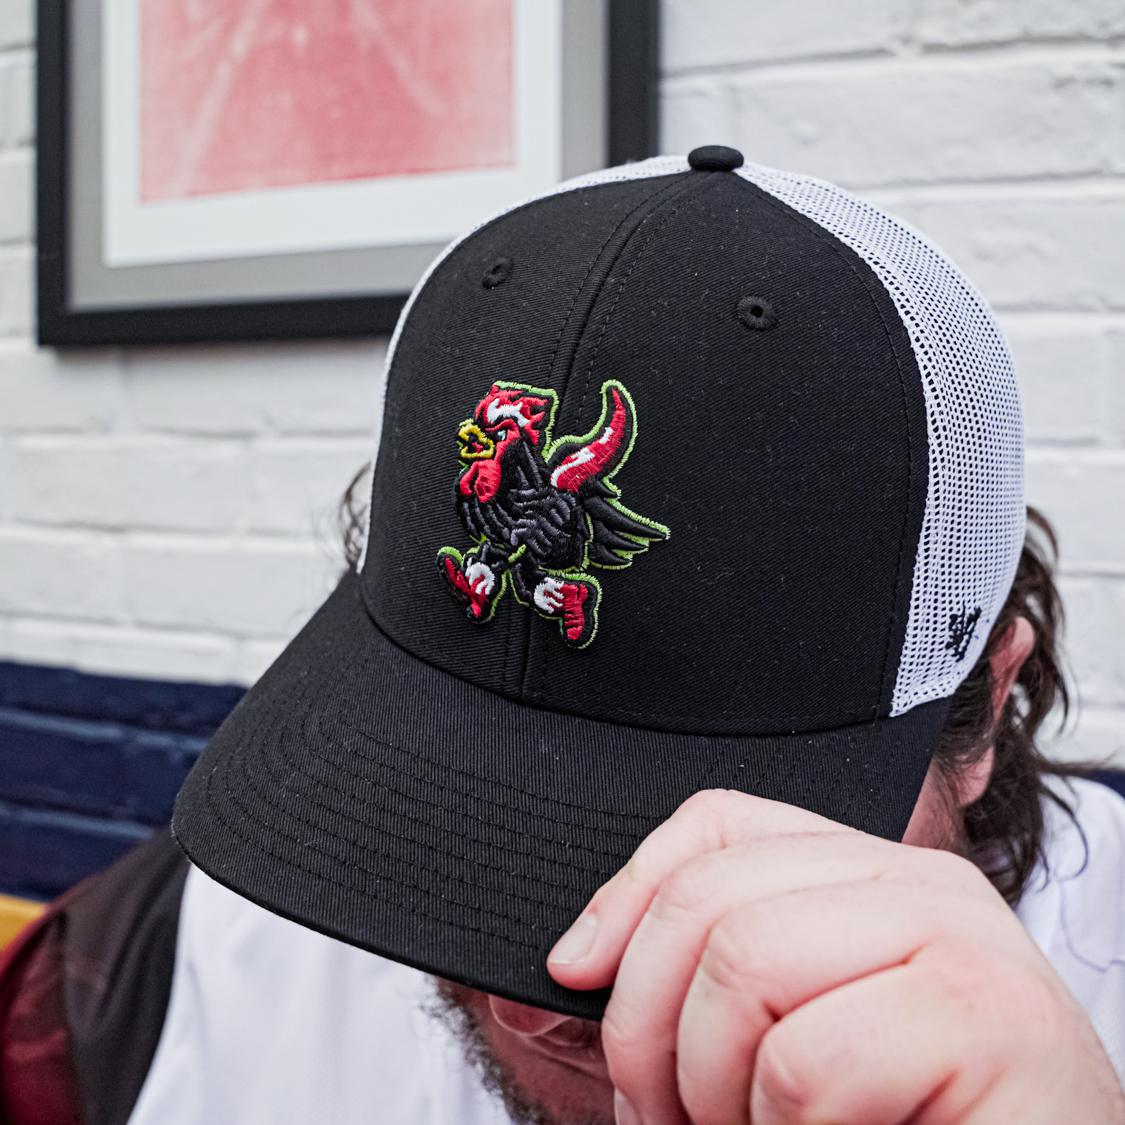 youth buccaneers hat